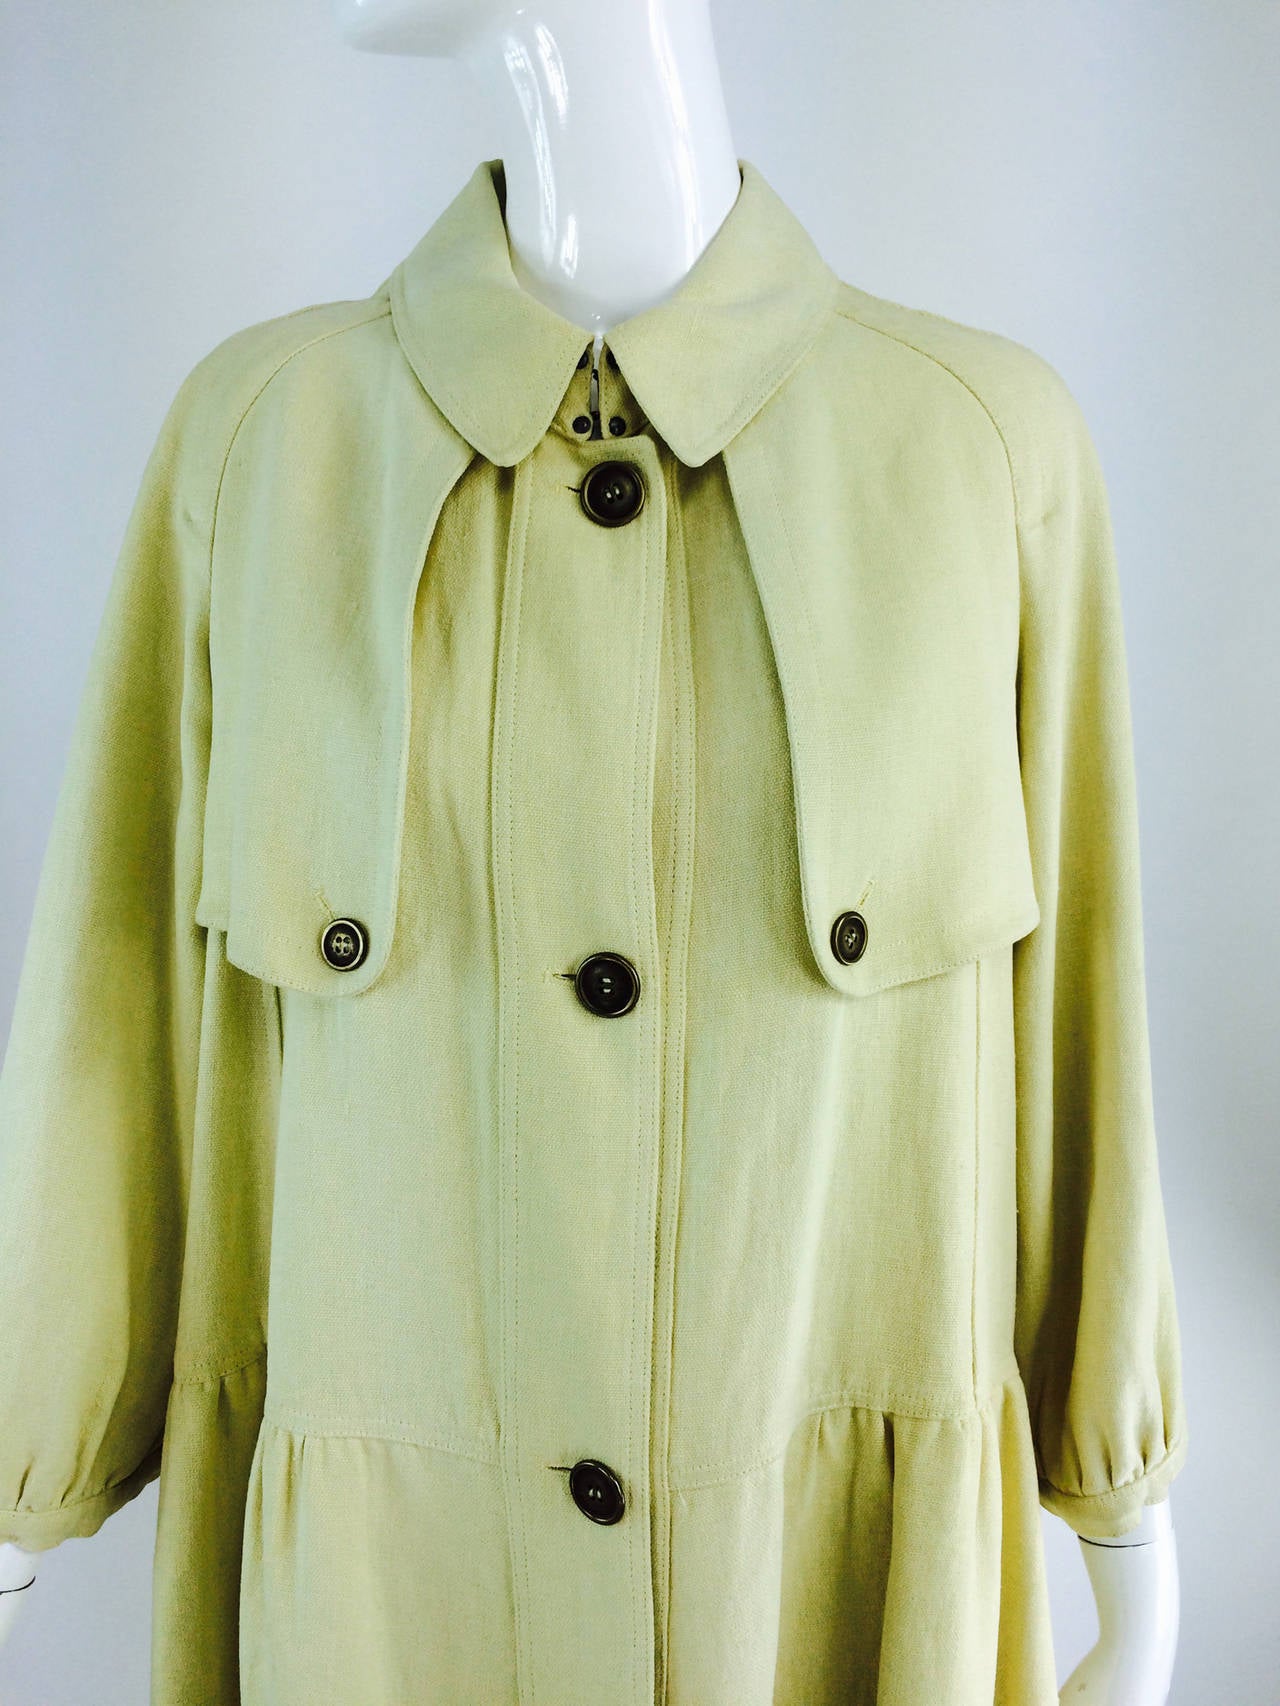 Burberry butter yellow hemp coat dress 2005...Butter yellow hemp coat dress has a full silhouette, with 3/4 length raglan sleeves that are gathered into a narrow cuff...Shoulder flap front & back...The skirt is gathered and full at the hip...Hip